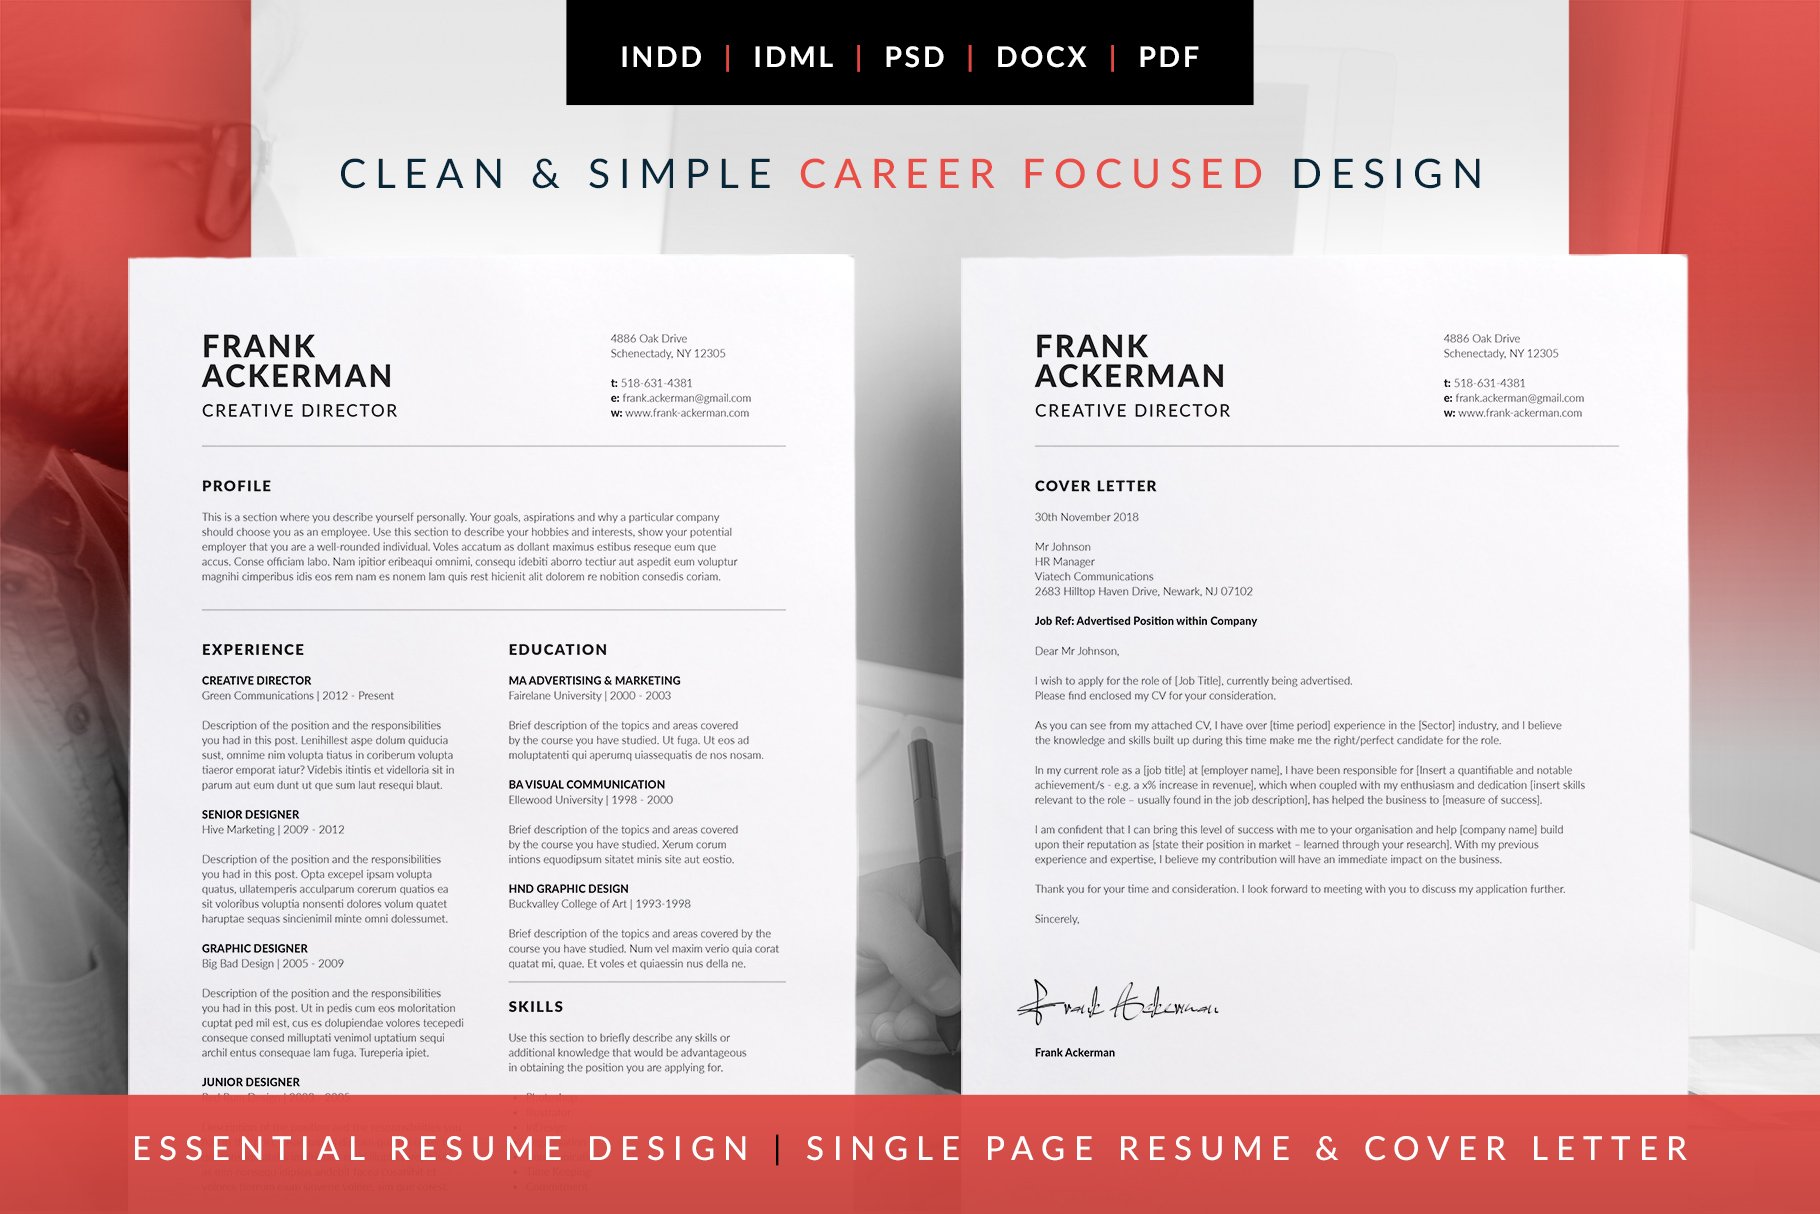 Essential Resume - Frank preview image.